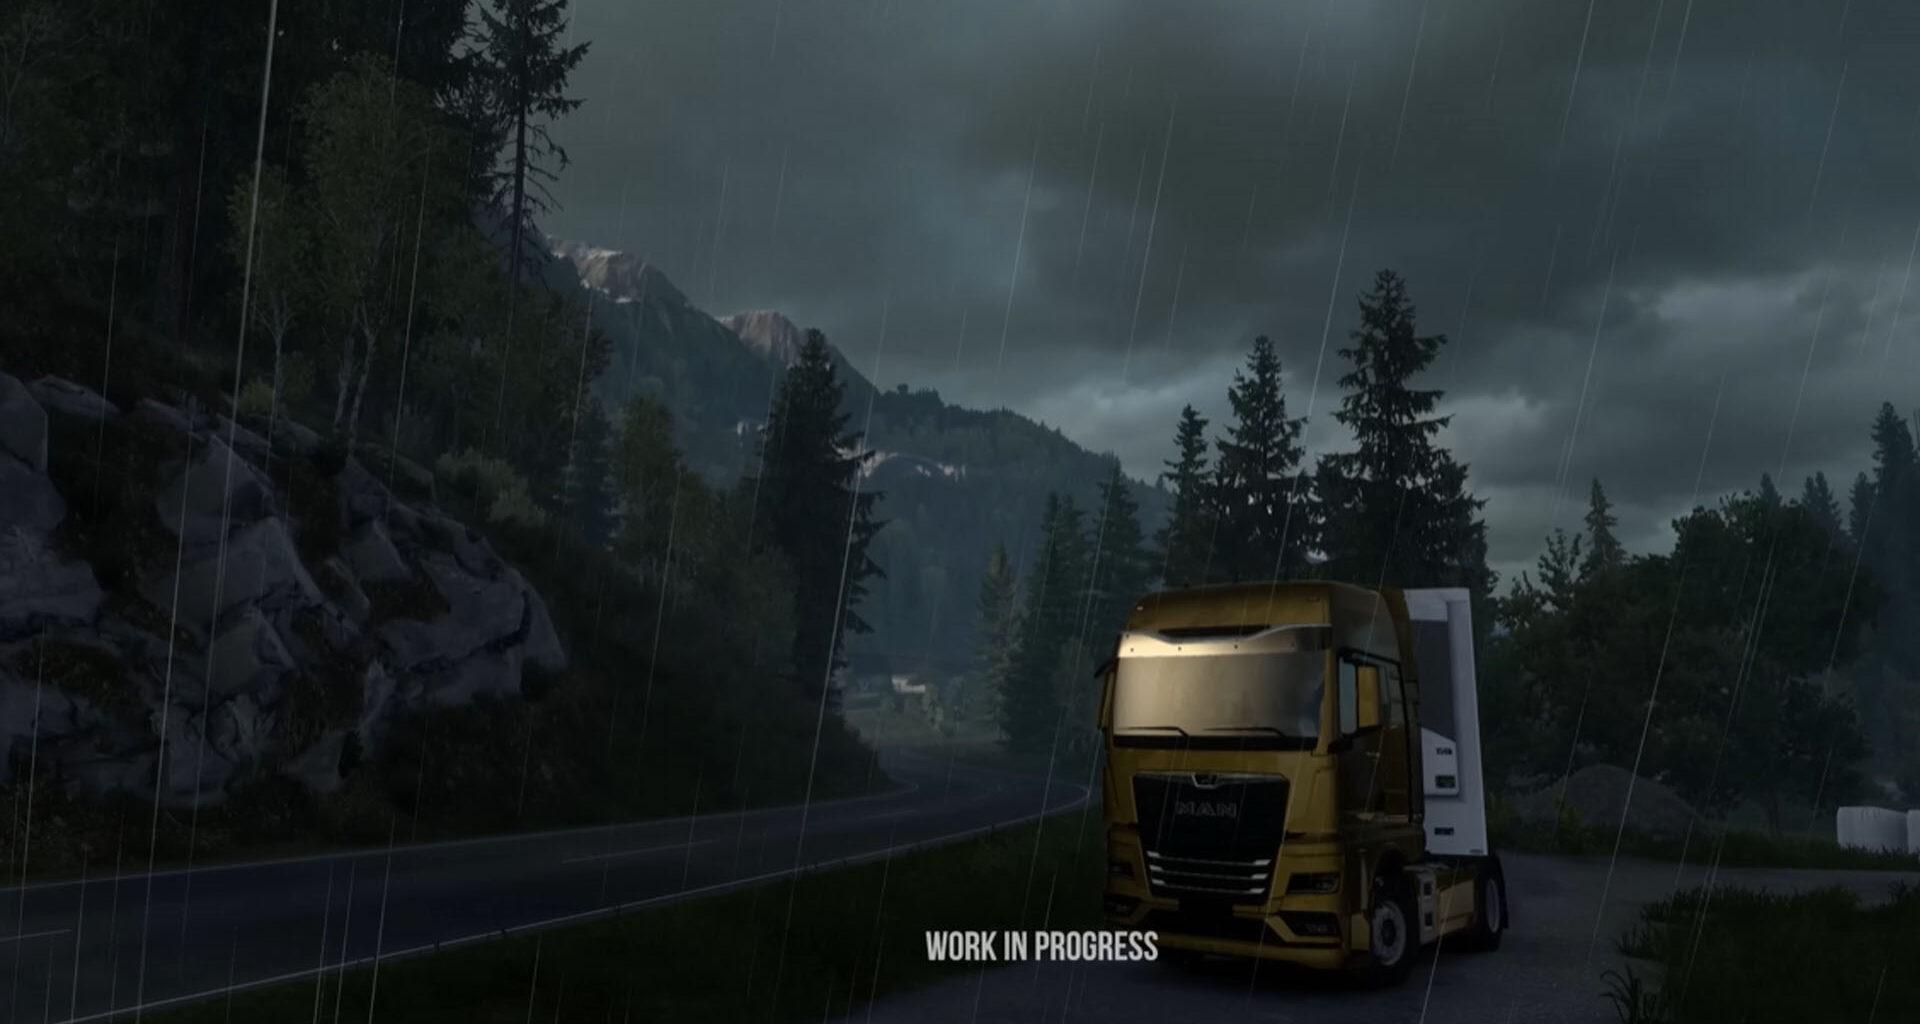 Used vehicles and HDR skies heading to Euro and American Truck simulators